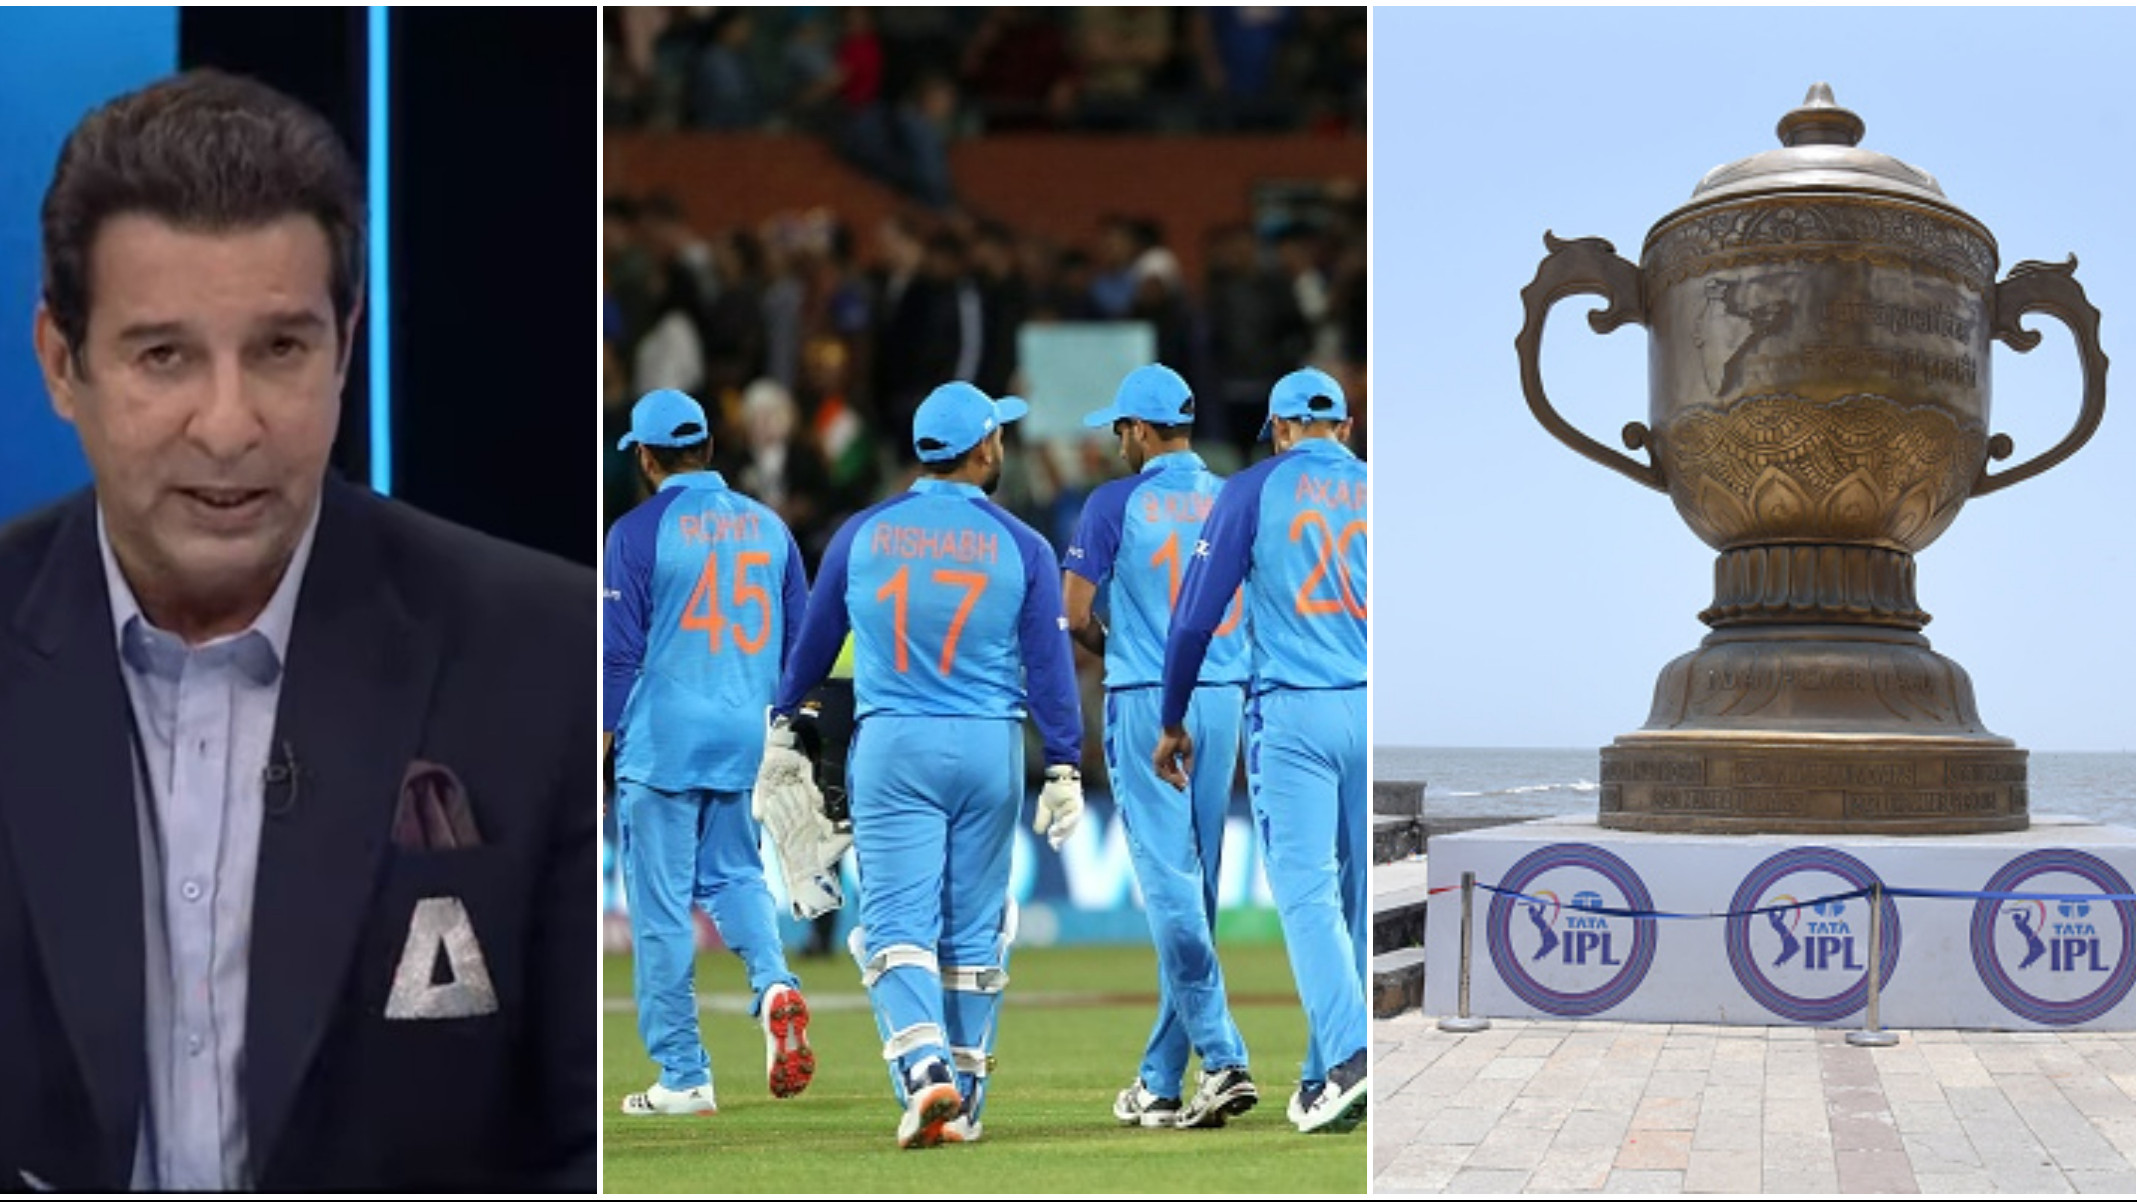 T20 World Cup 2022: “Since the advent of IPL, India have never won a T20 World Cup” - says Wasim Akram